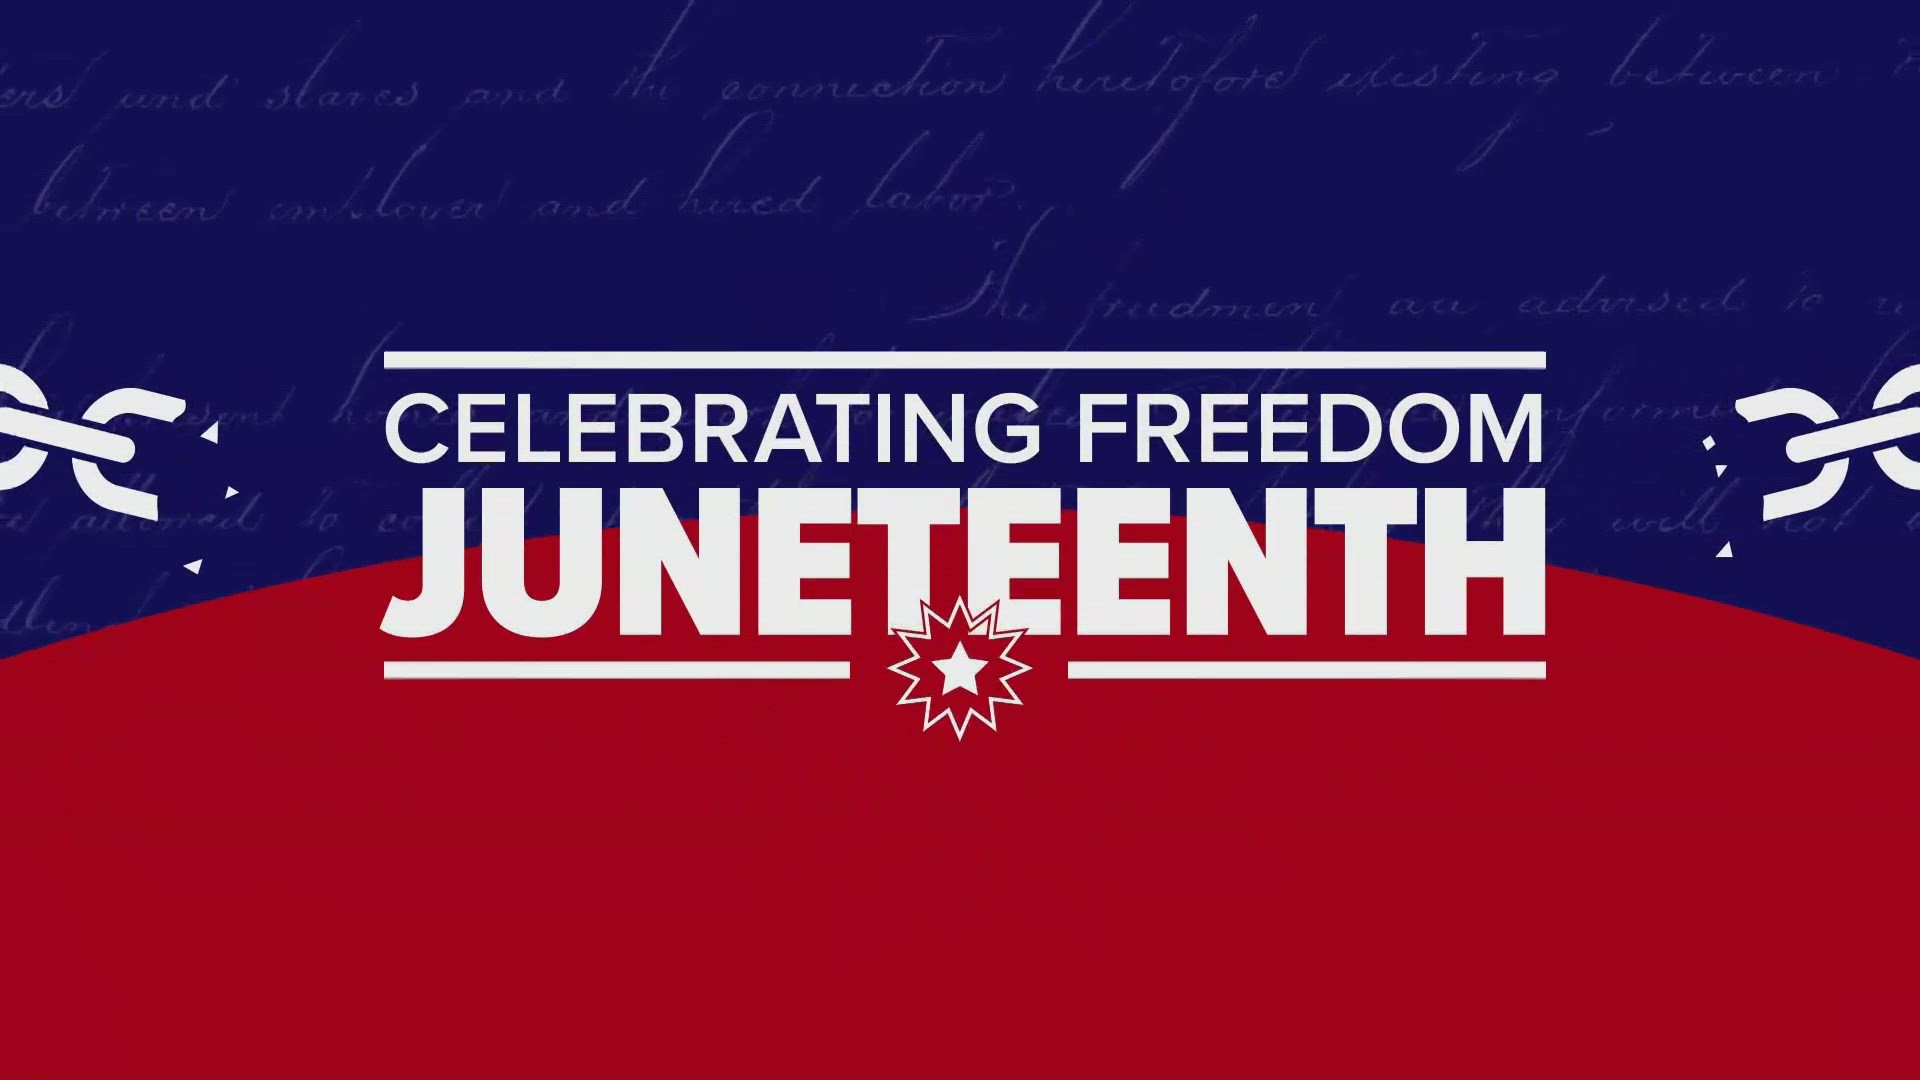 The Sacramento Black Chamber president said she’s made it her mission to make sure that story of Juneteenth is told so that history doesn’t repeat itself.